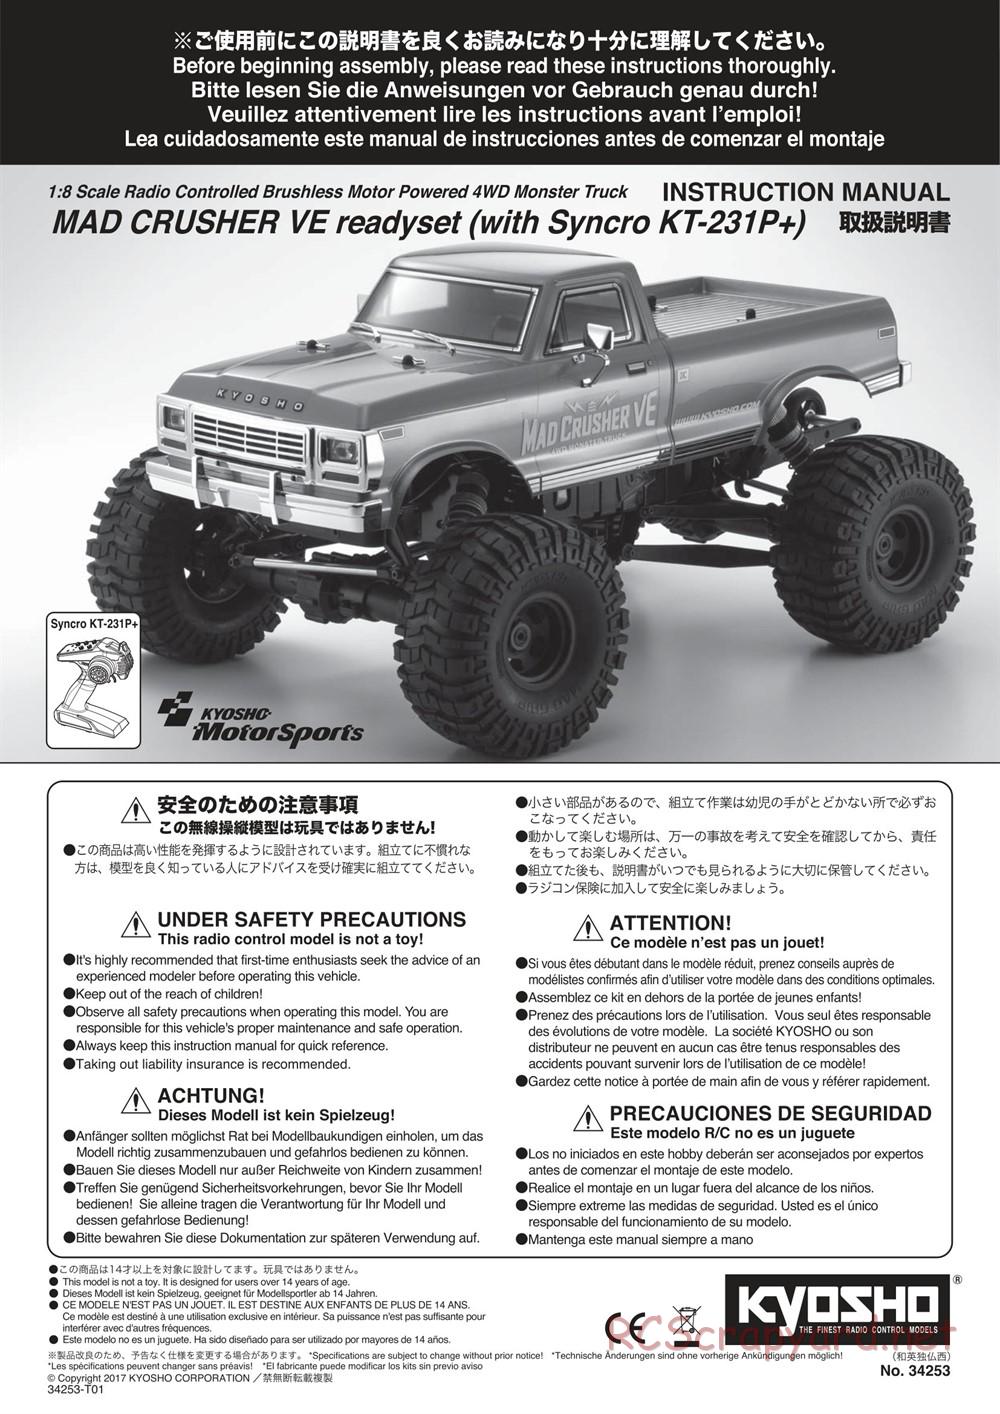 Kyosho - Mad Crusher VE - Manual - Page 1